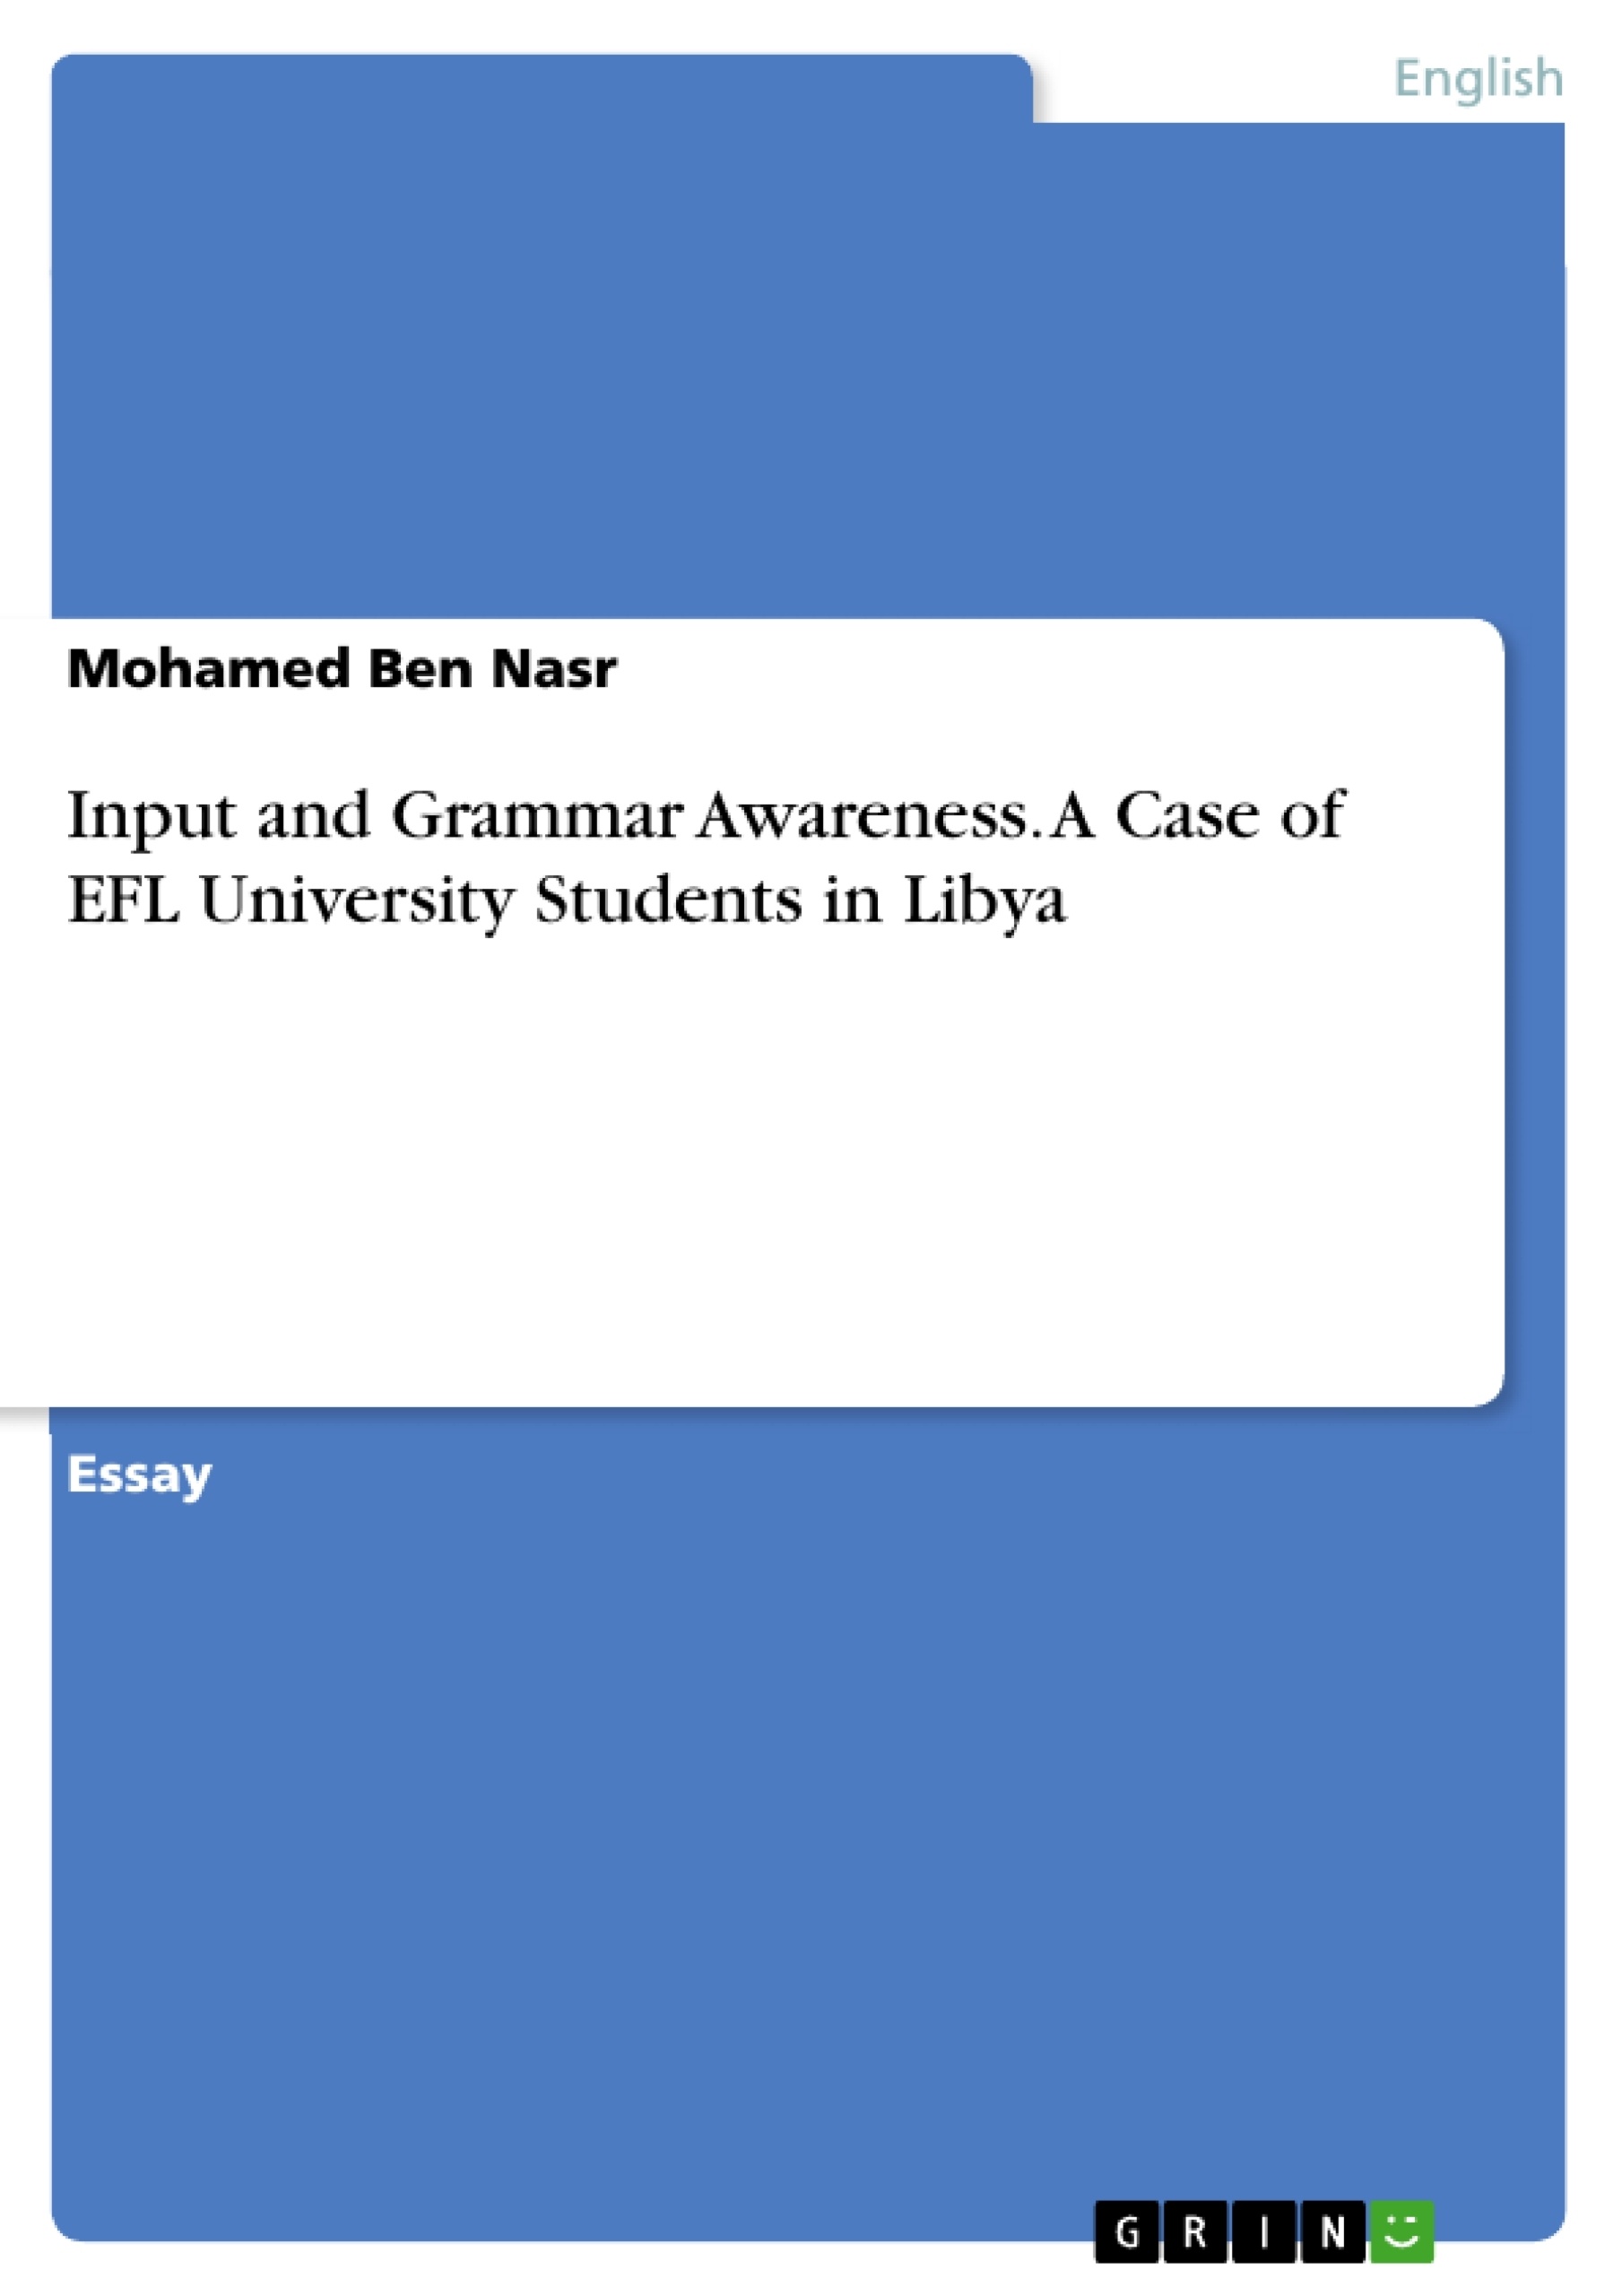 Title: Input and Grammar Awareness. A Case of EFL University Students in Libya